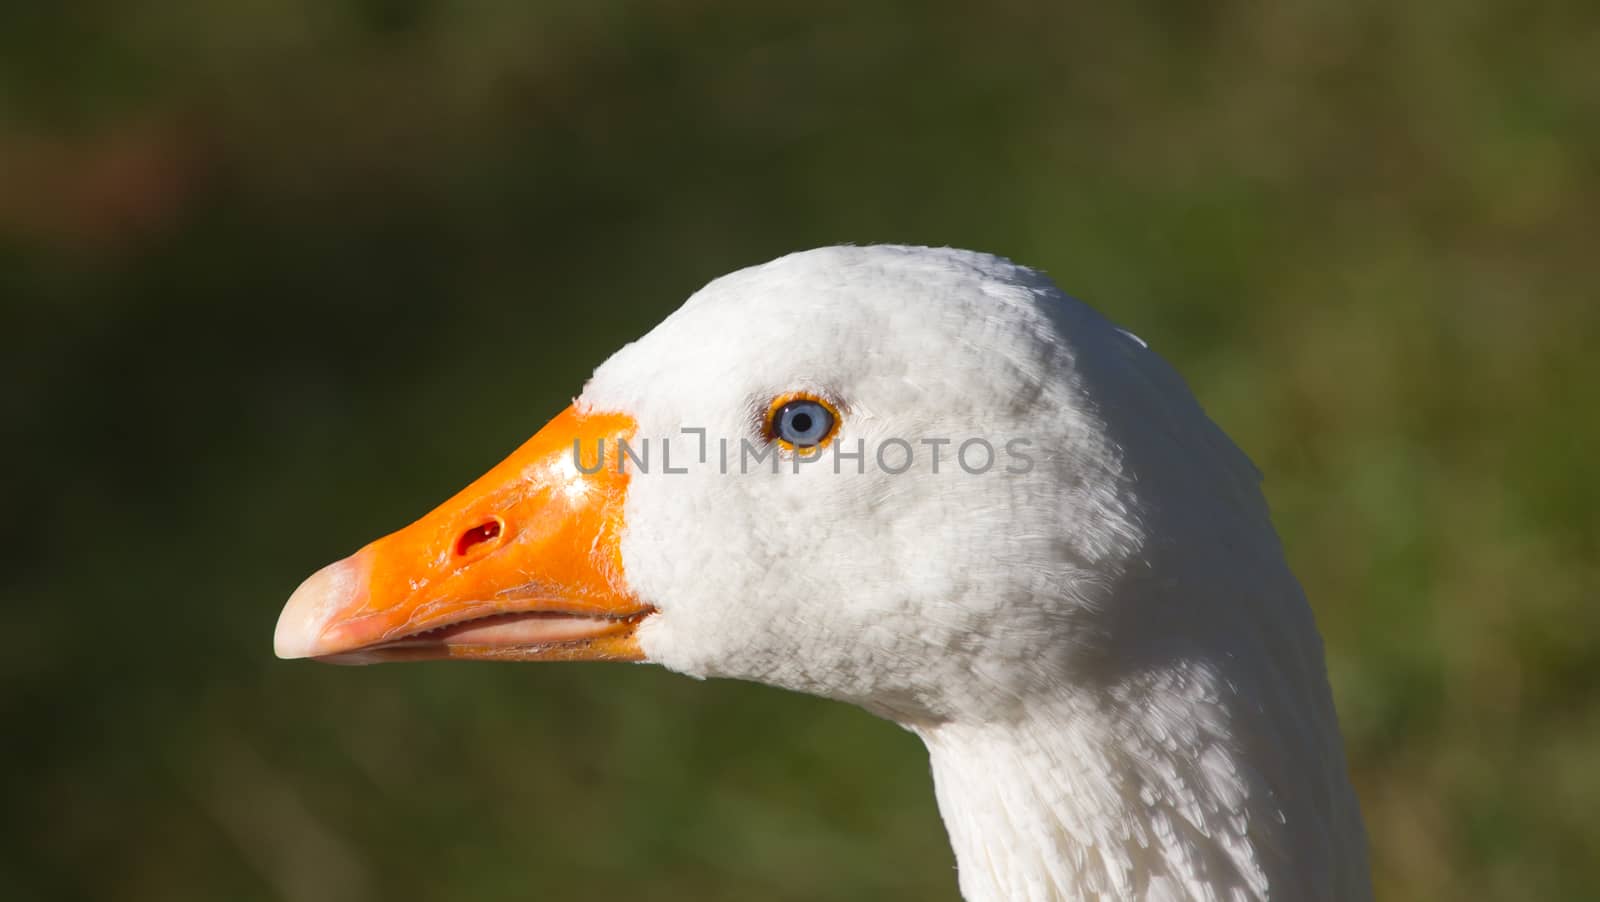 White goose head by Stootsy